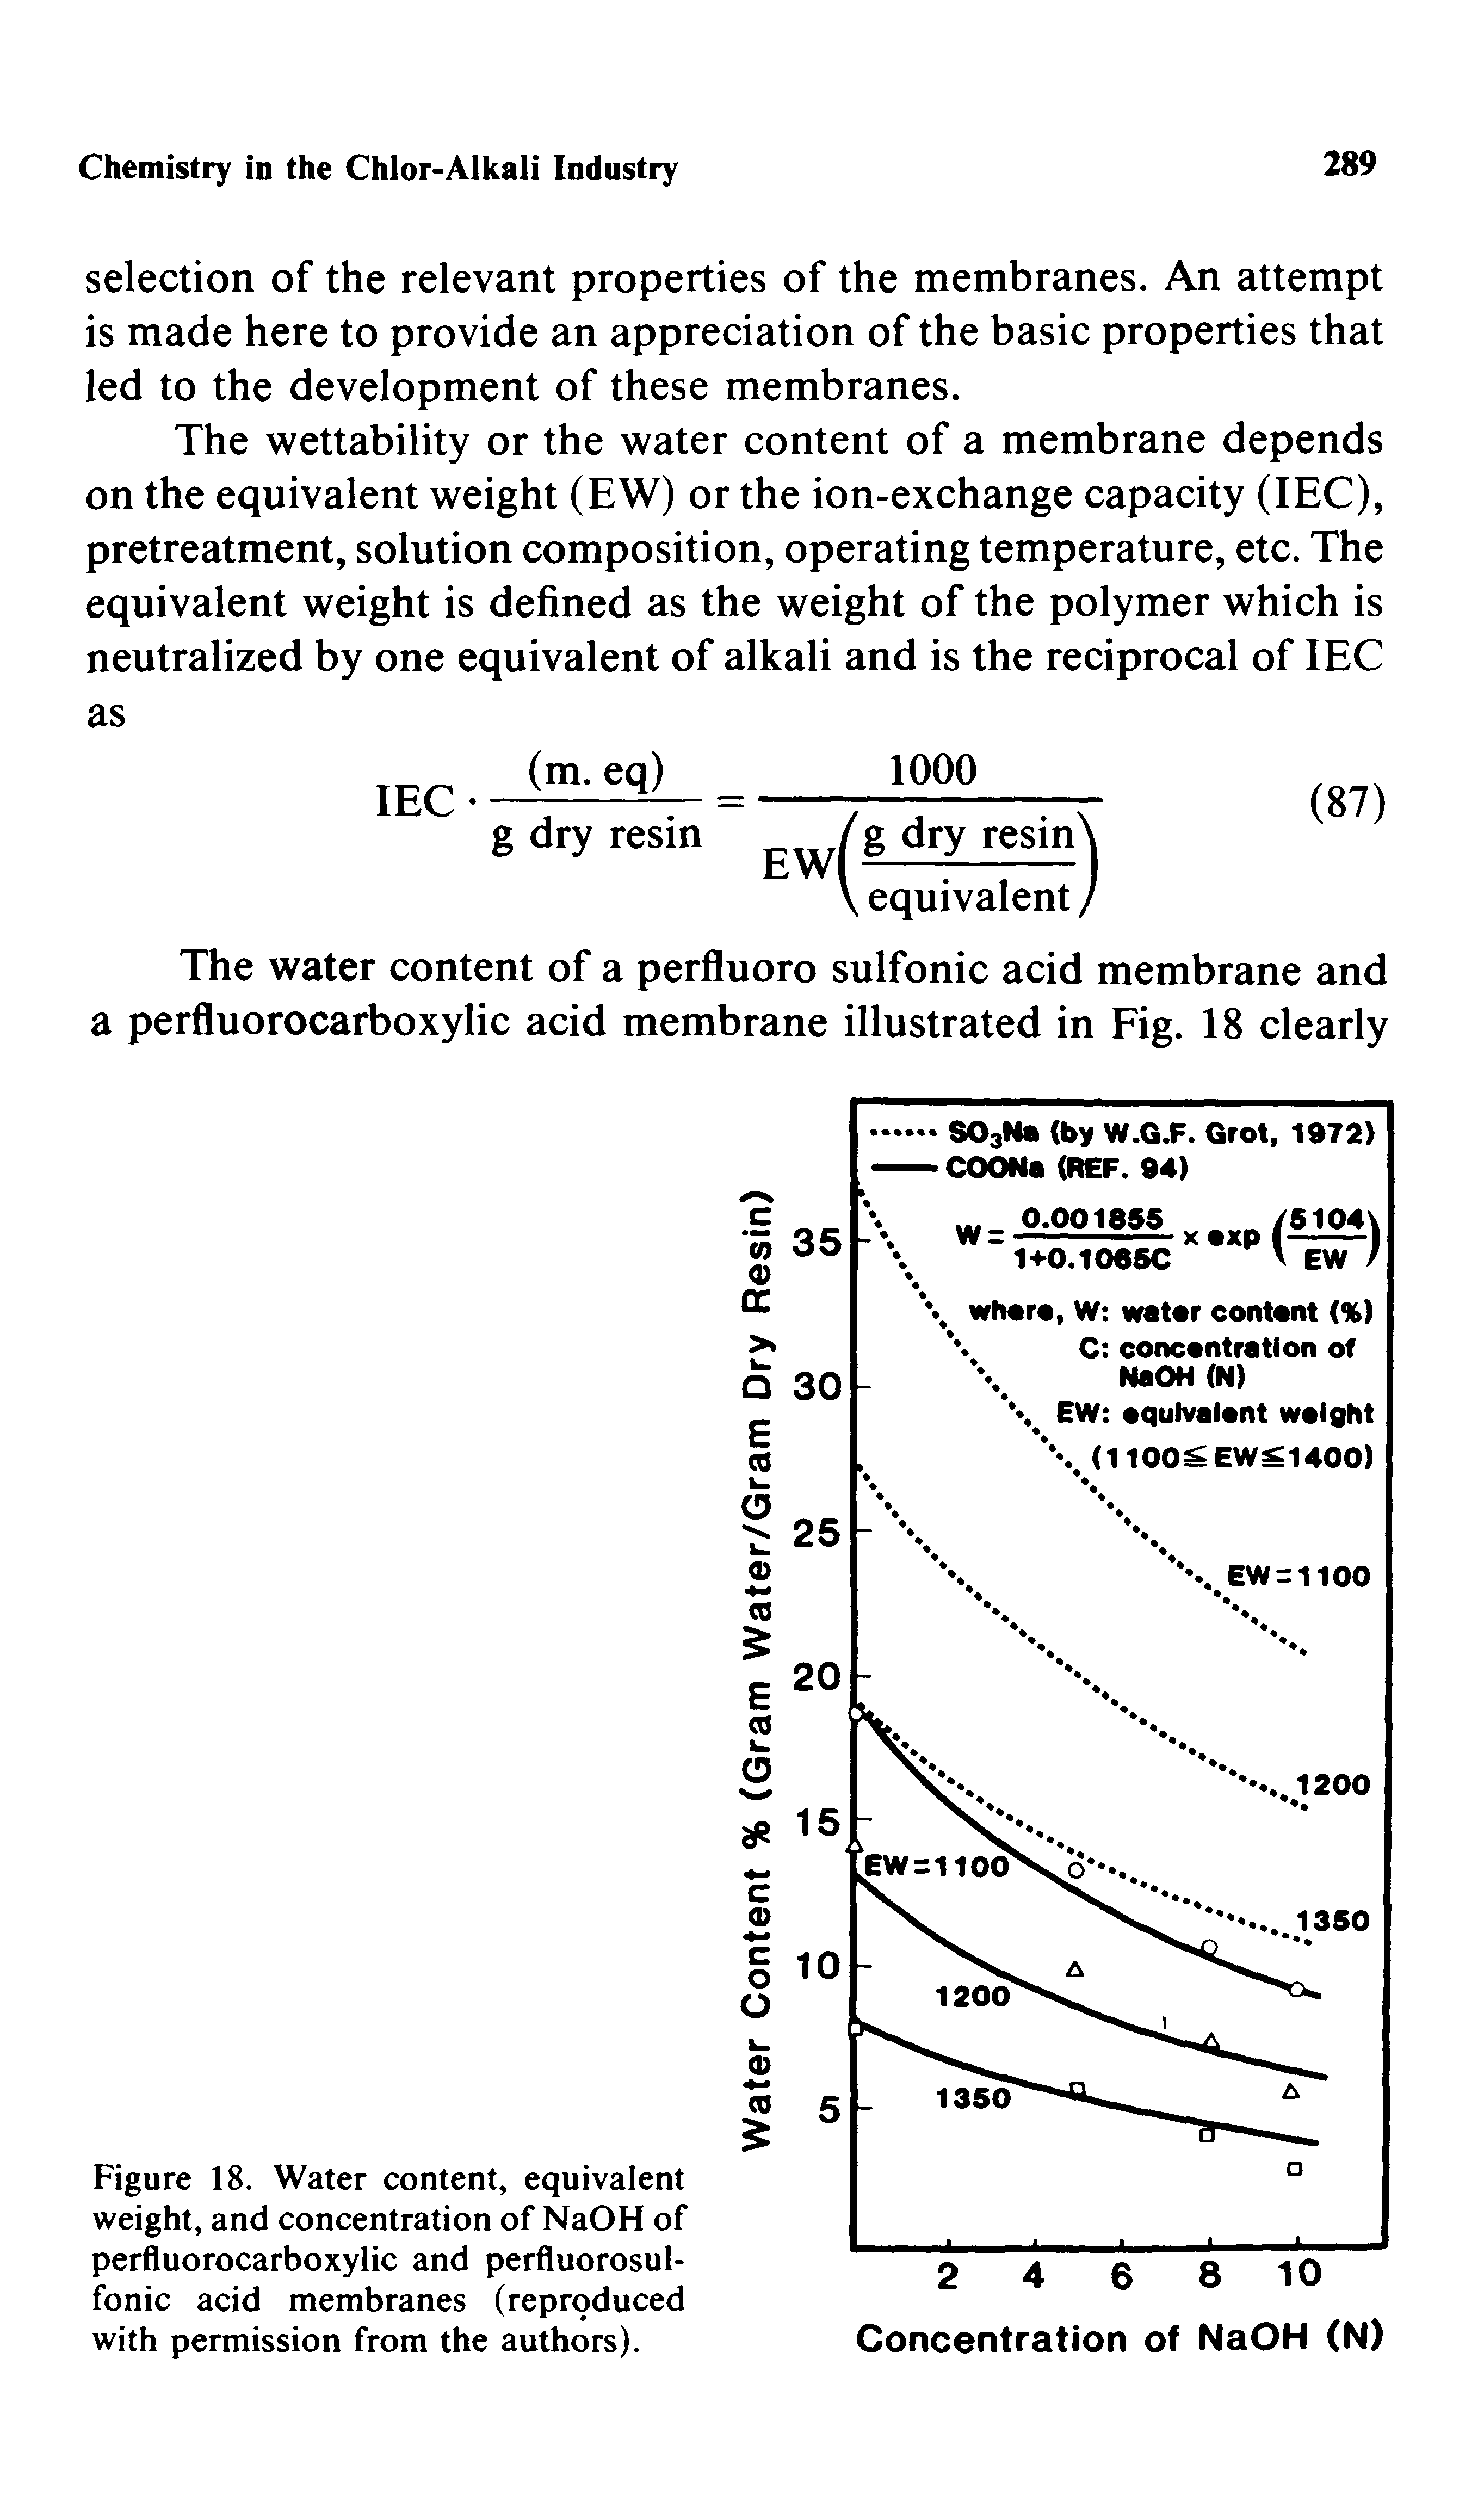 Figure 18. Water content, equivalent weight, and concentration of NaOH of perfluorocarboxylic and perfluorosul-fonic acid membranes (reproduced with permission from the authors).